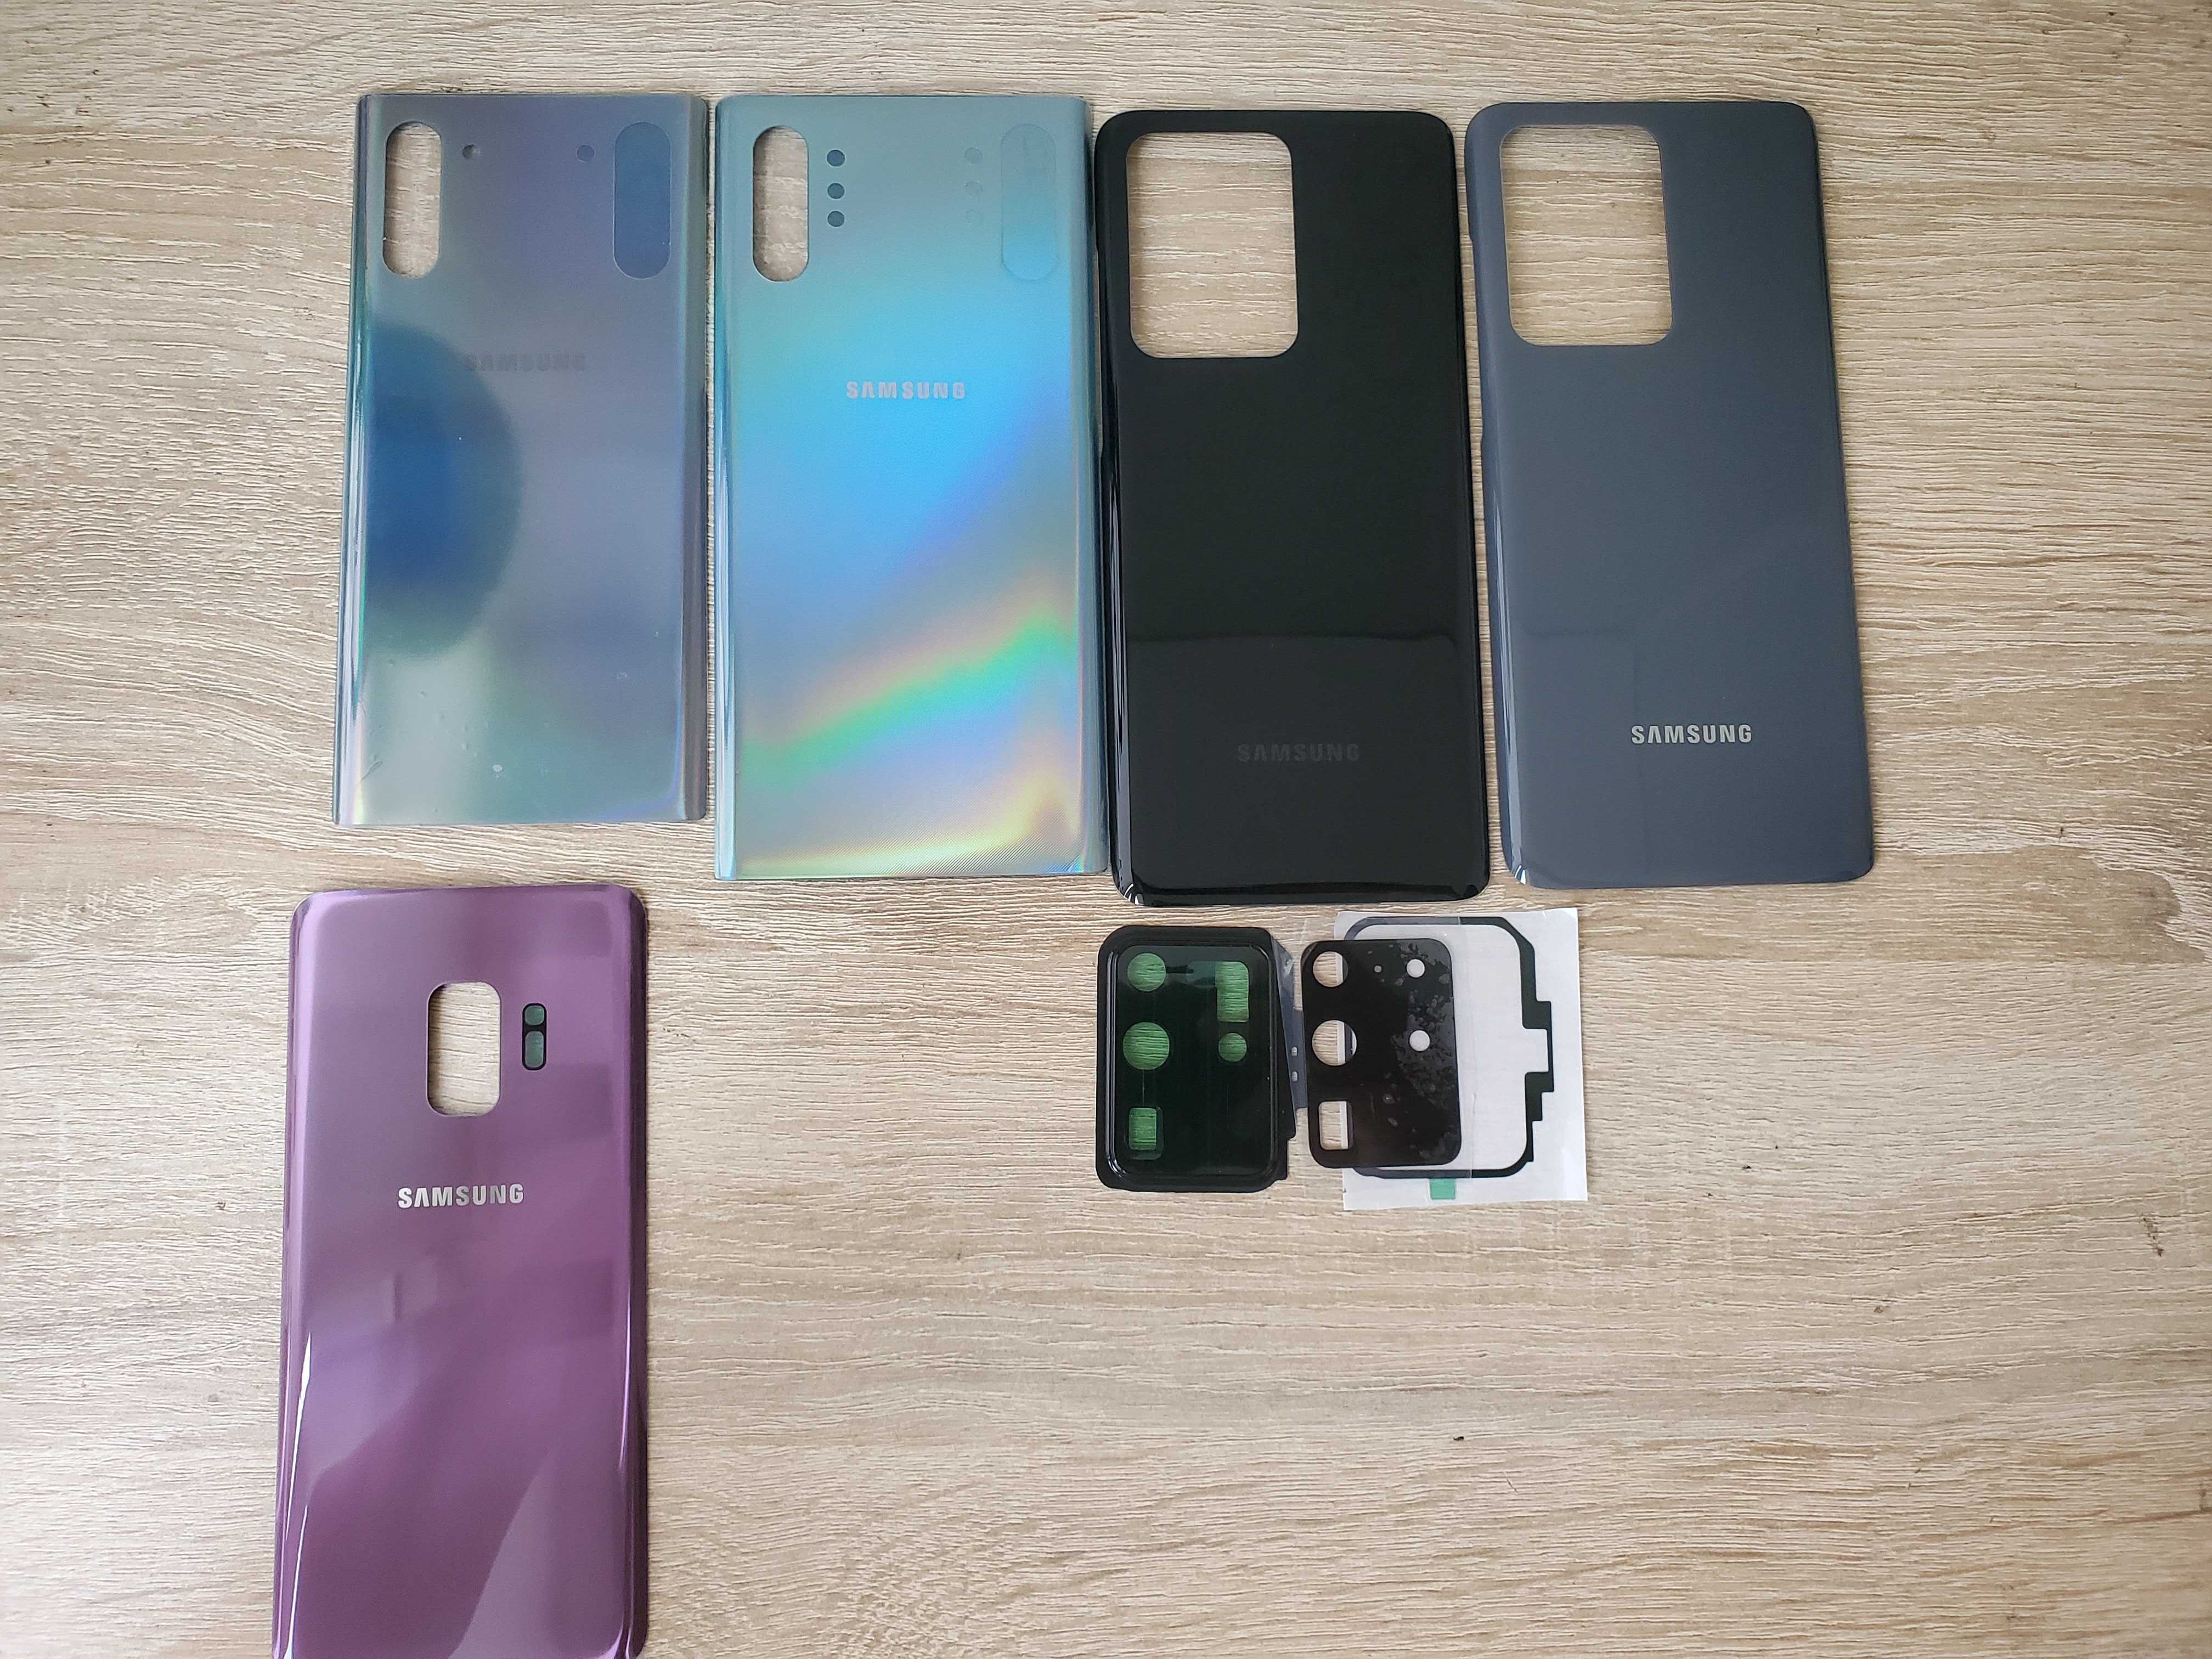 Запчасти Samsung  s10, 10+, note 10,10+, s20, 20+